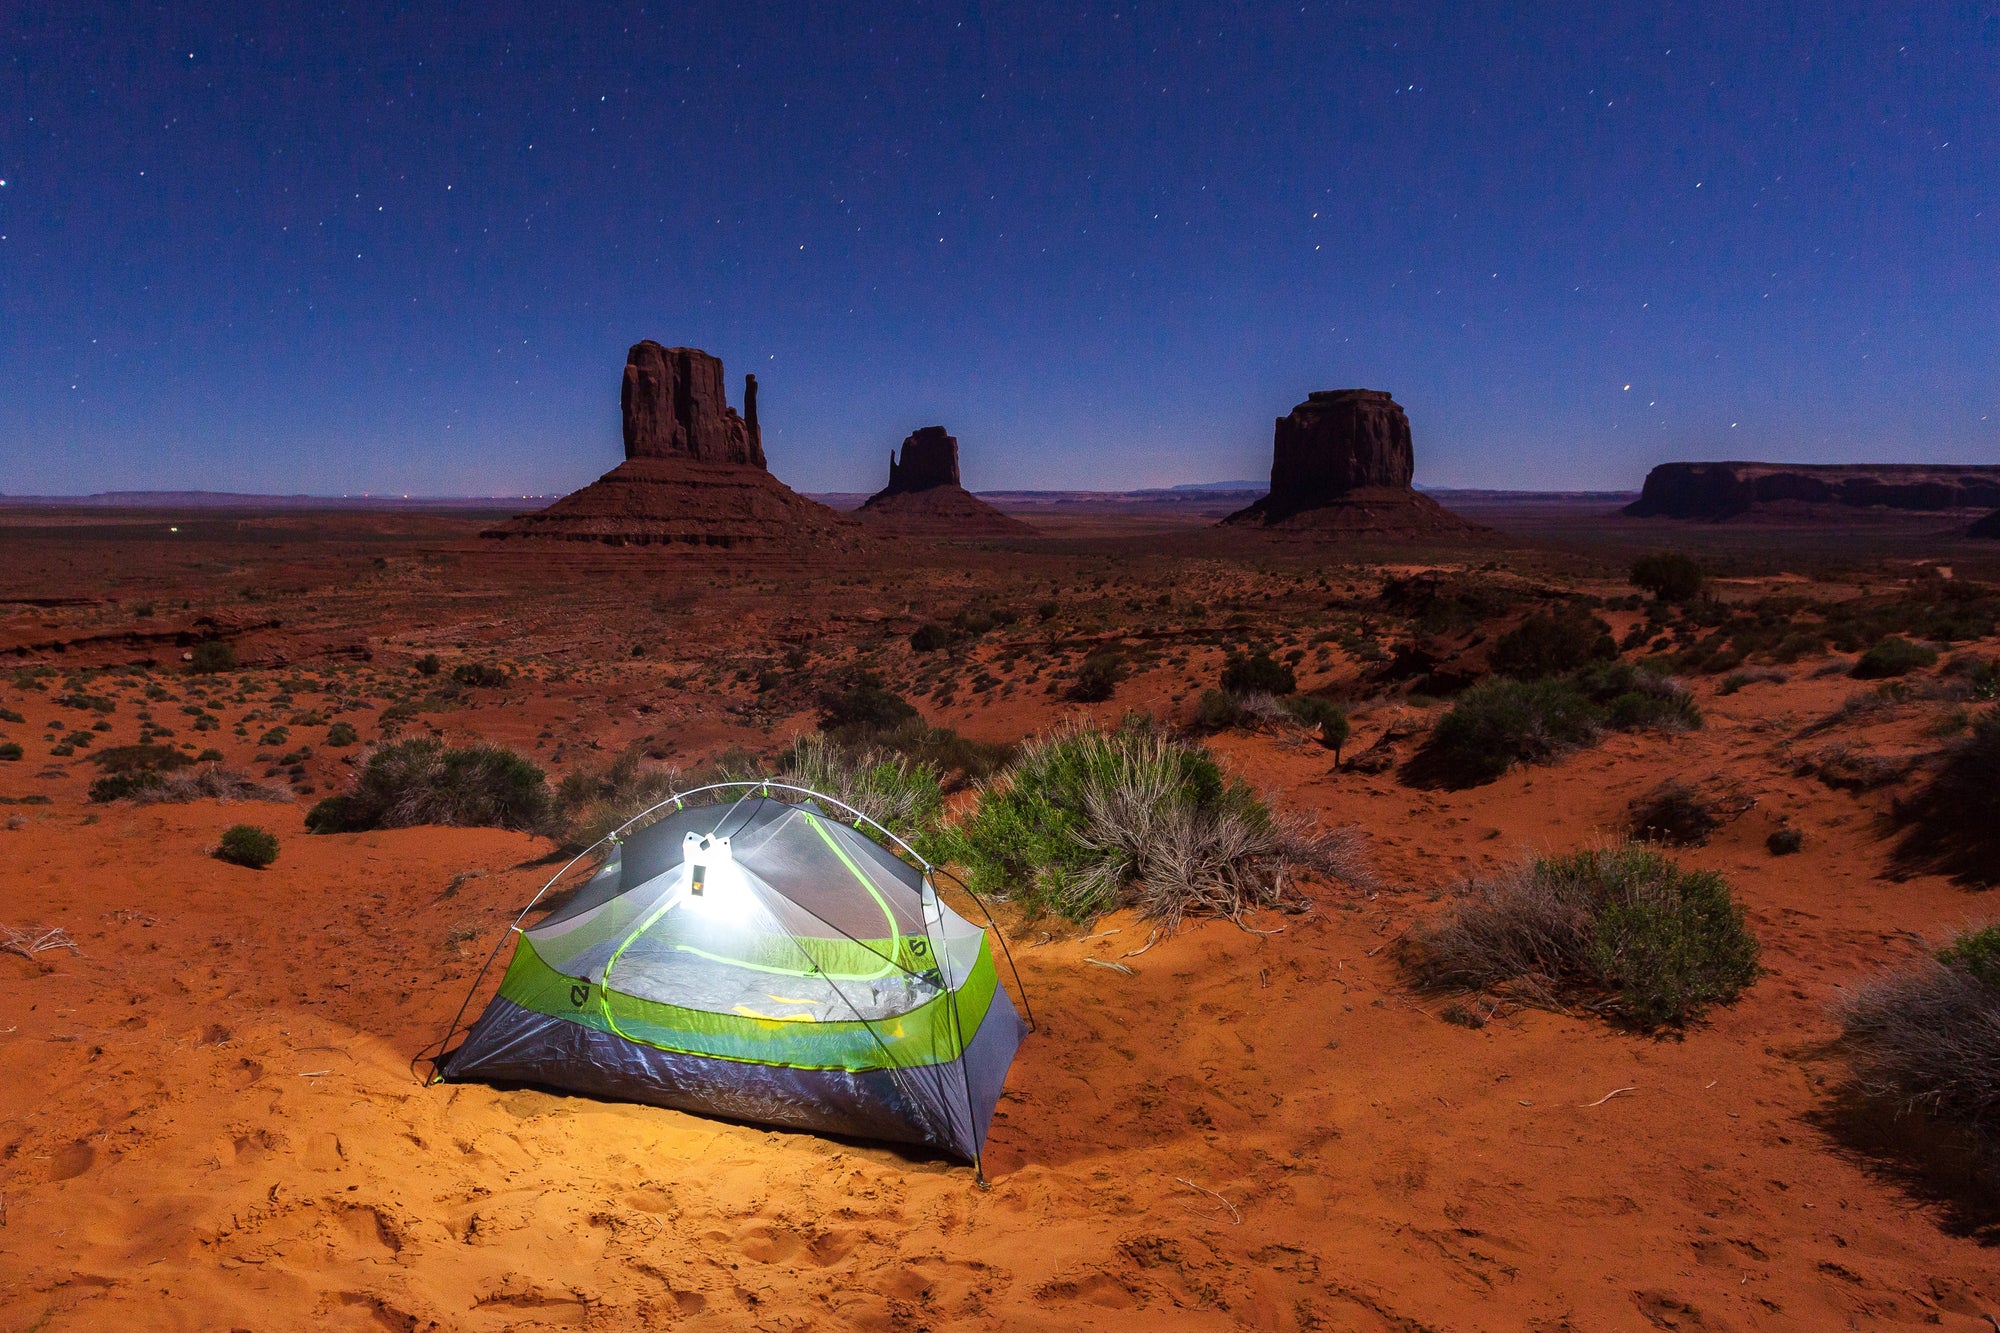 Tent in the desert with a starry night sky above